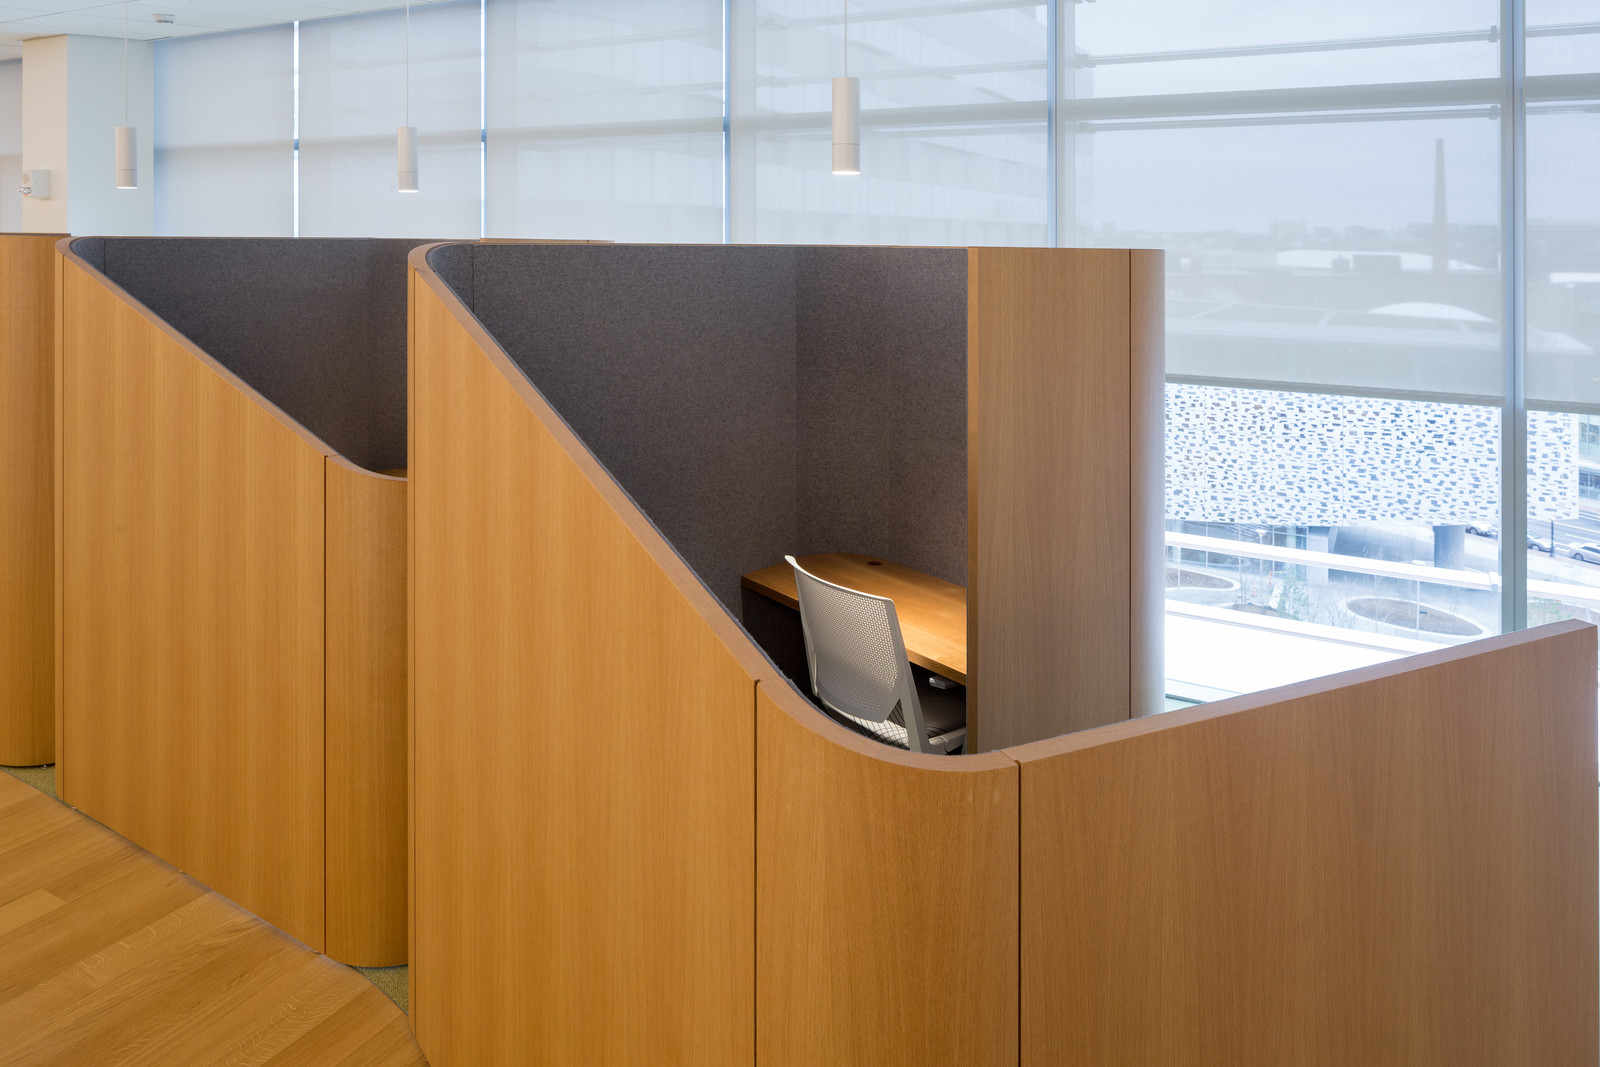 A close-up of our custom white oak cubicles at the Novartis Headquarters in Cambridge, MA